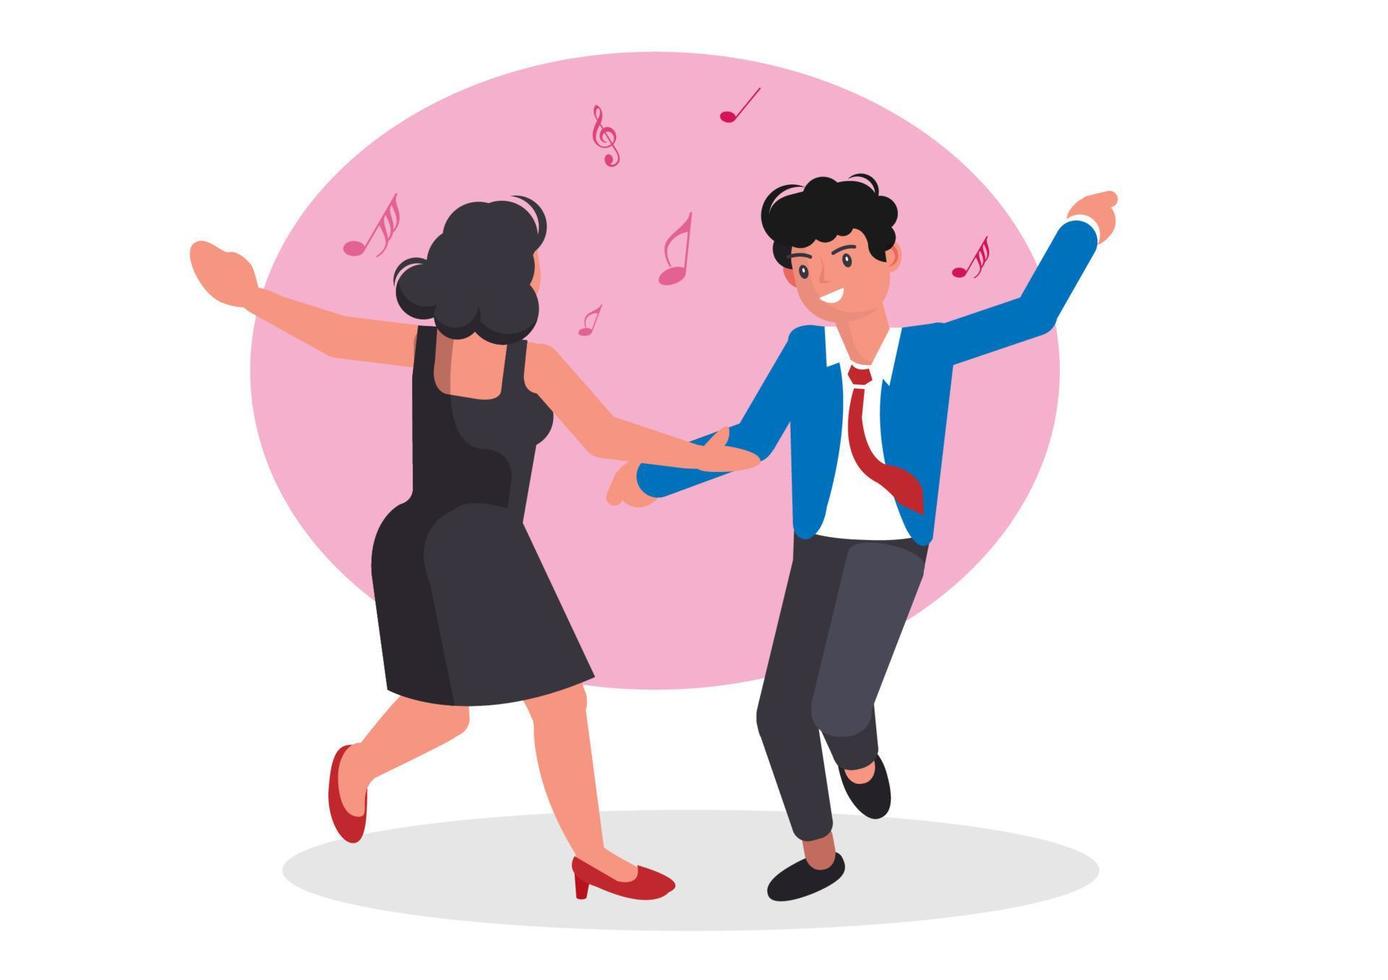 Women and men enjoy dancing to upbeat music at parties. Flat style cartoon illustration vector